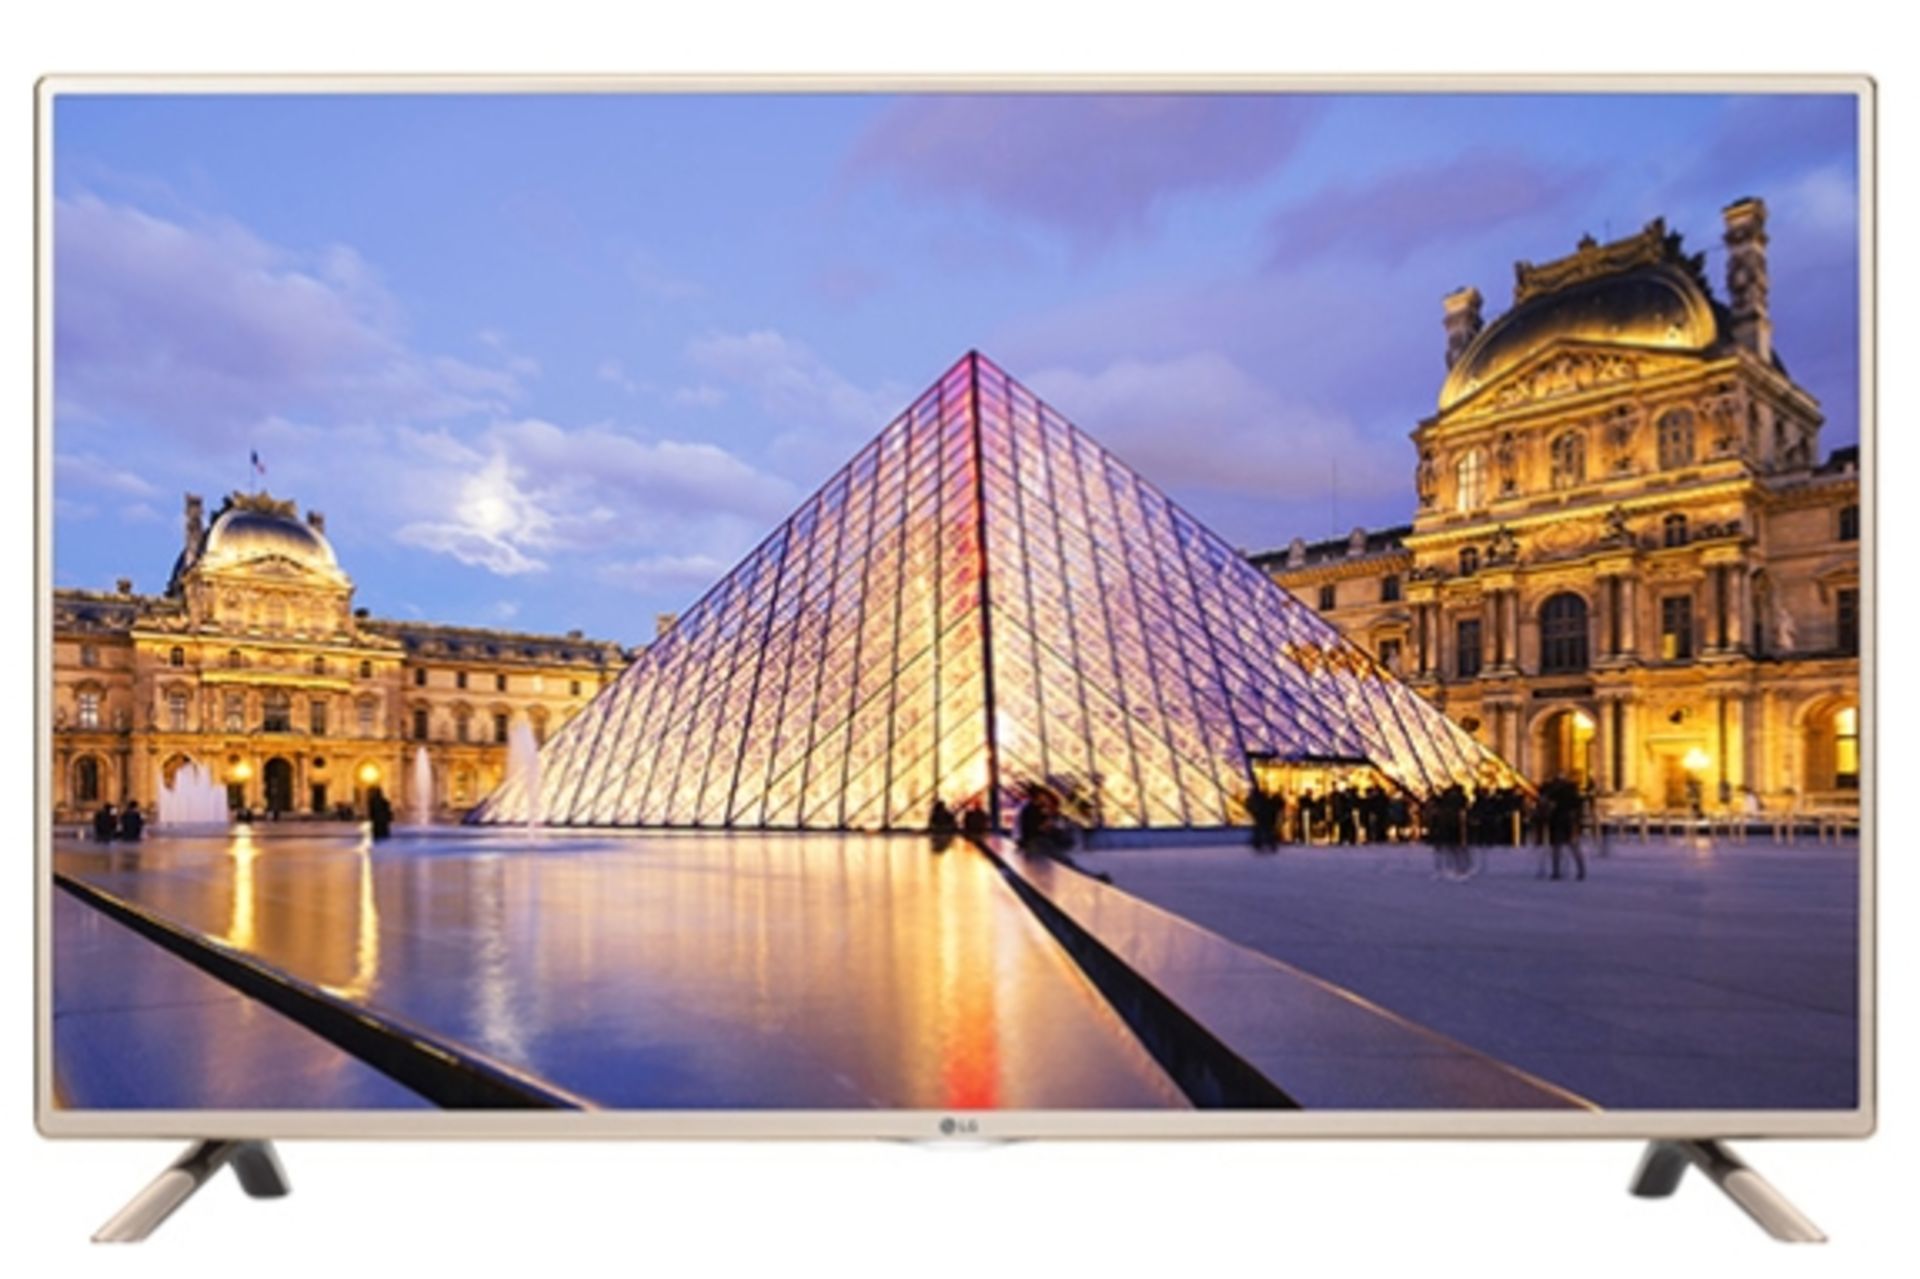 V Grade A 32LF5610 LG 32" LED Full HD TV With Freeview - Crystal Clear Viewing Experience